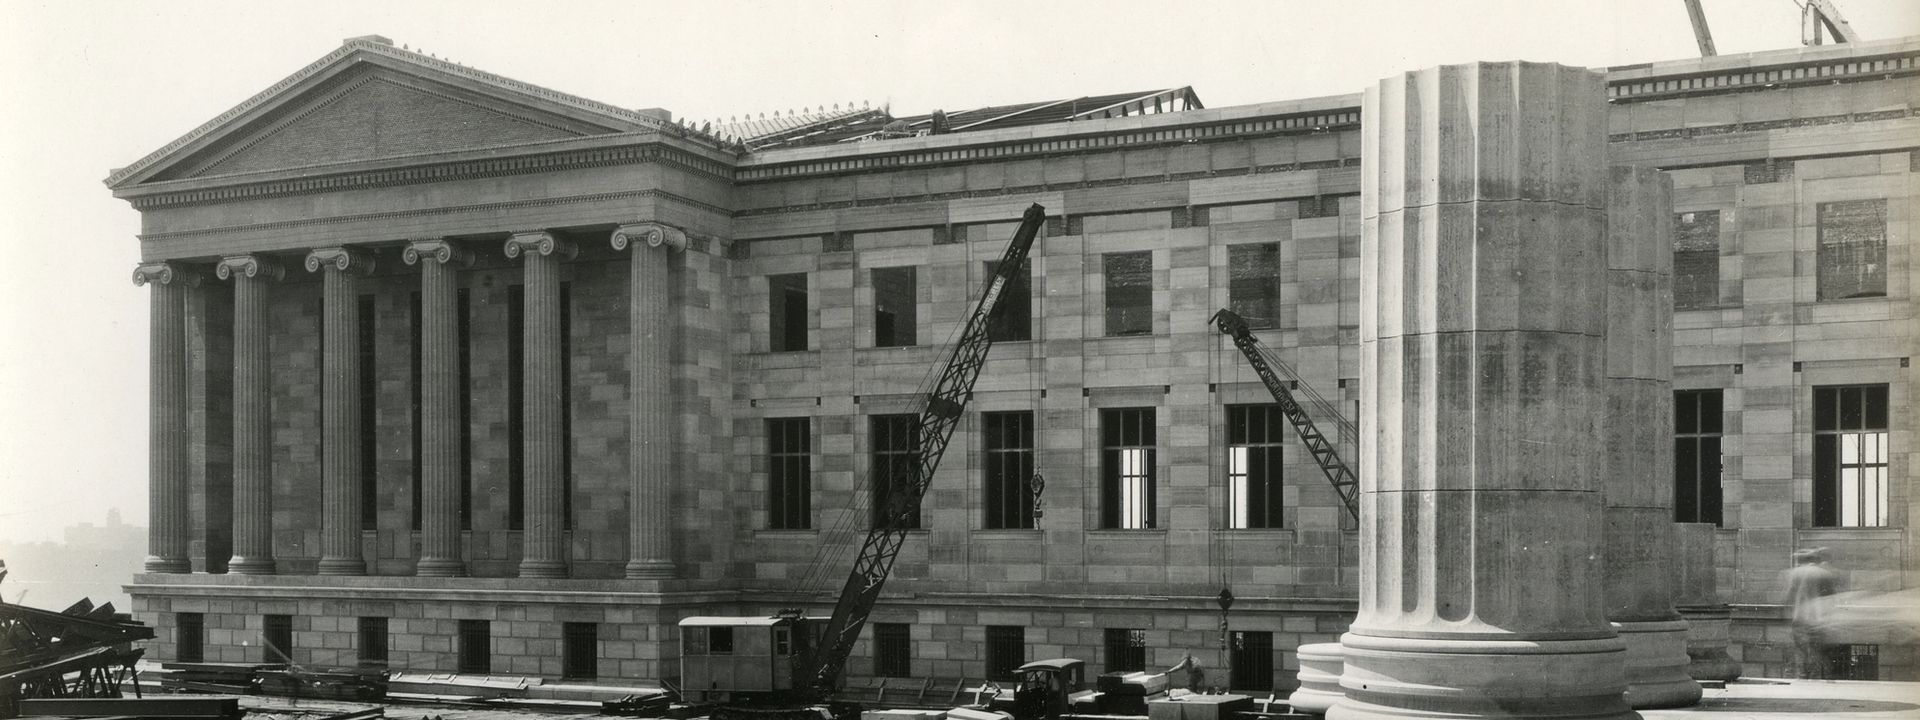 Black and white photograph of the museum being built in 1926